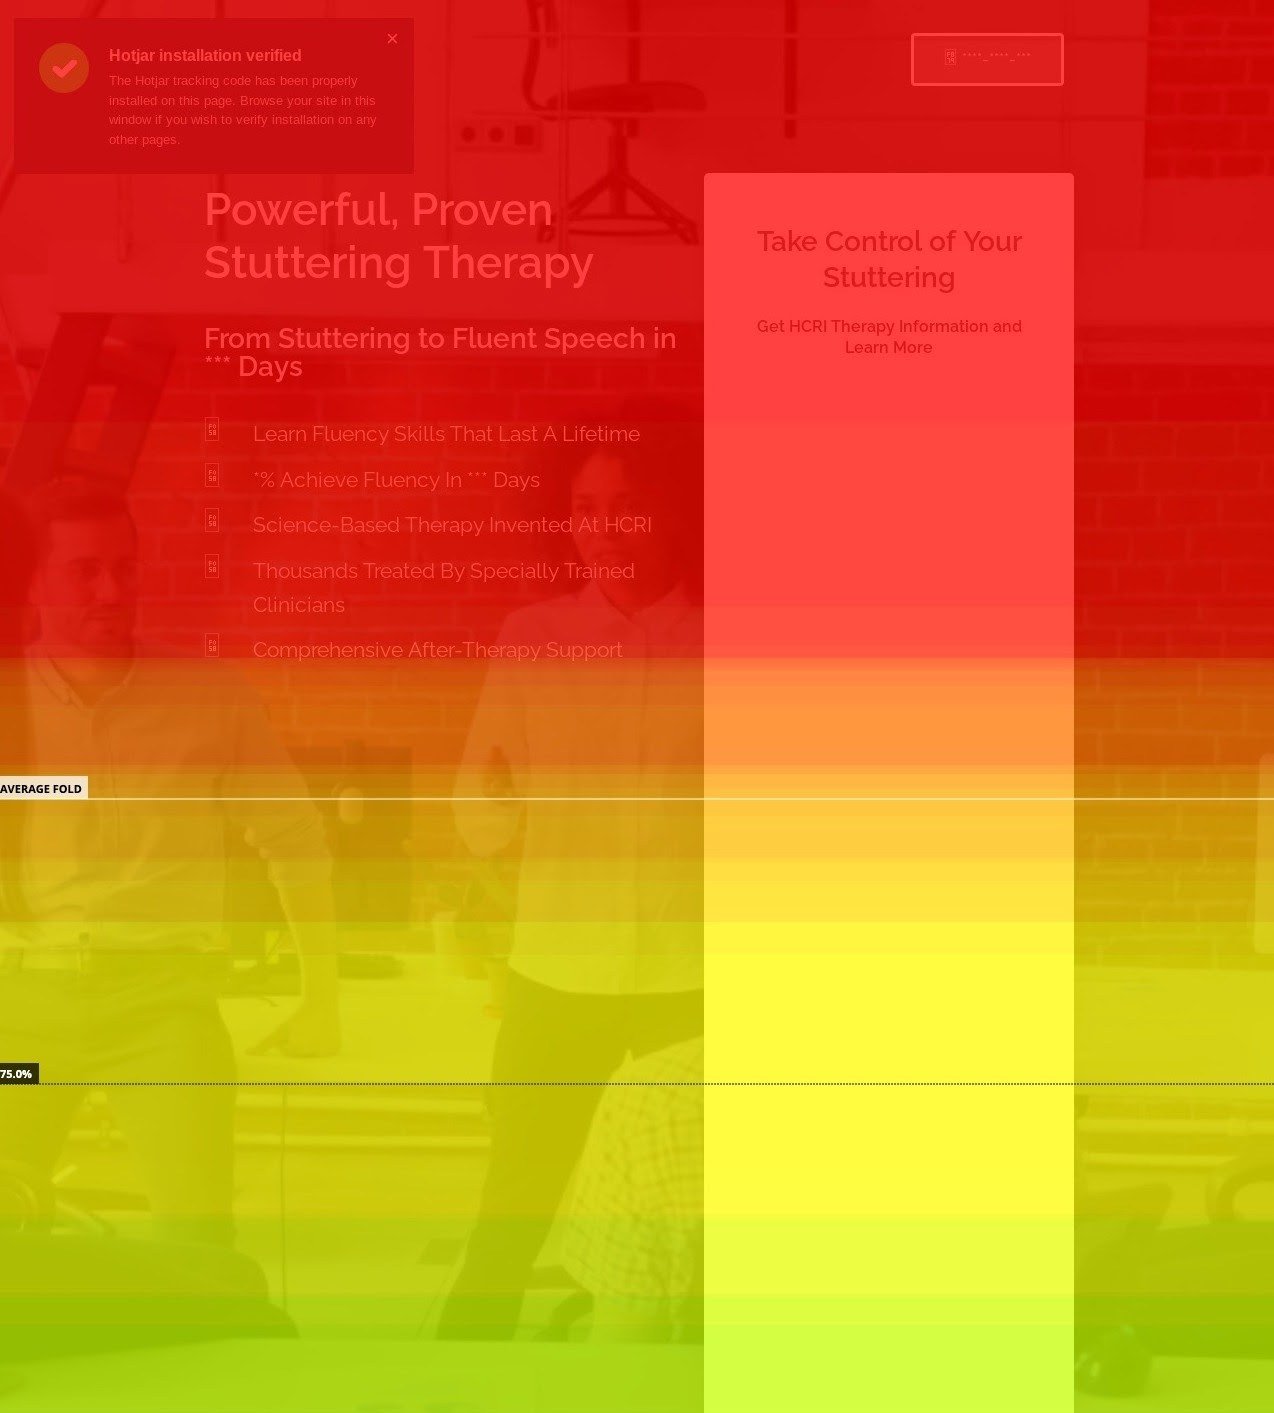 The homepage heatmap for a stuttering therapy company.